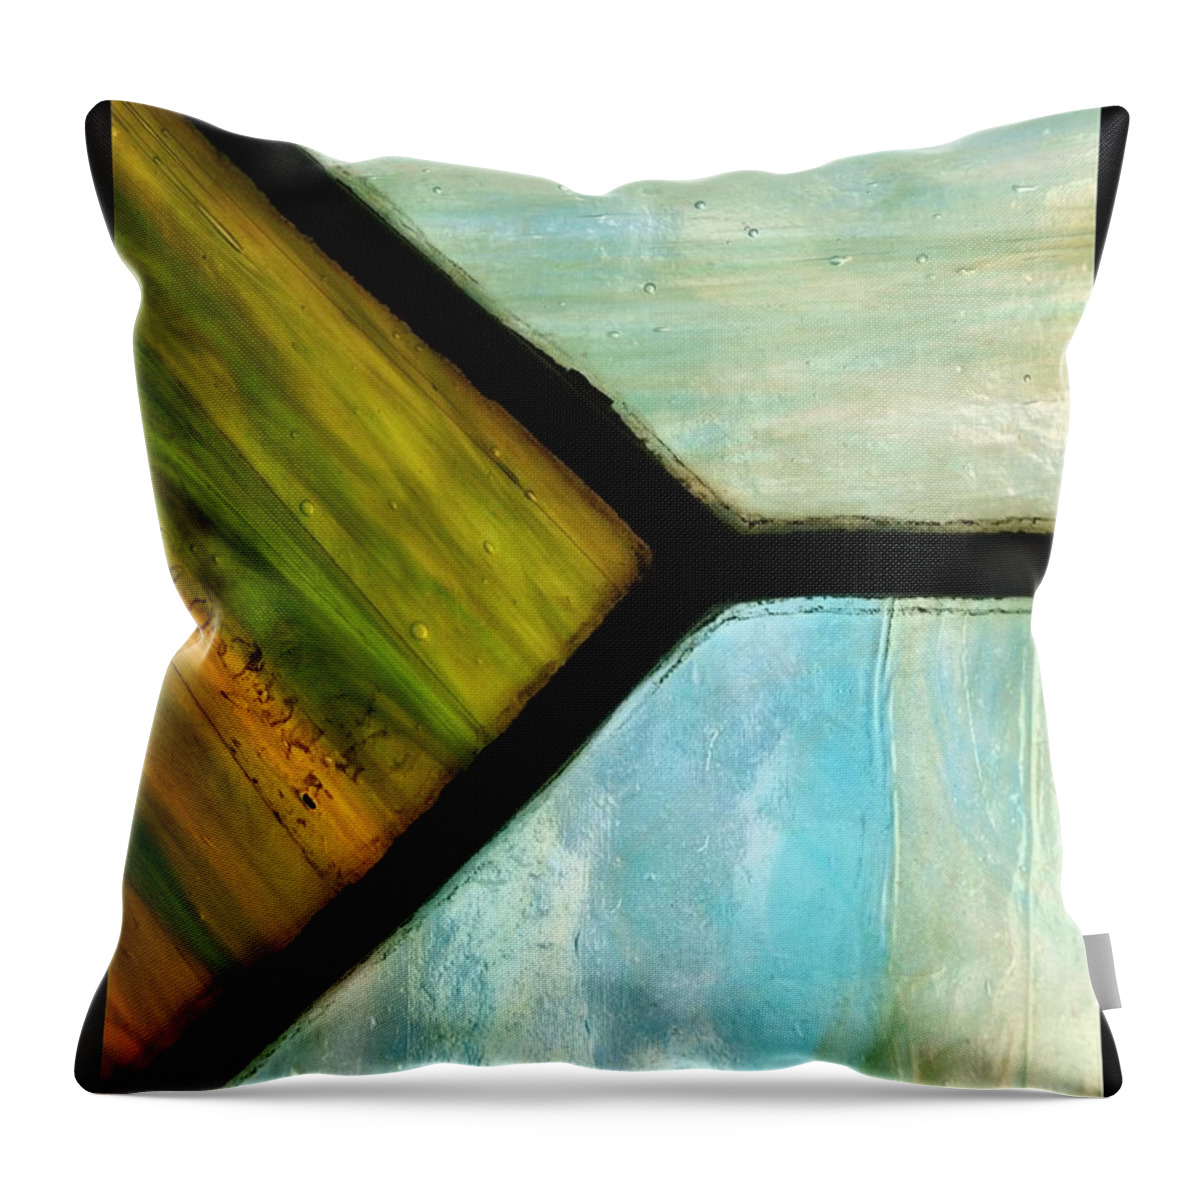 Abstract Throw Pillow featuring the photograph Stained Glass 6 by Tom Druin